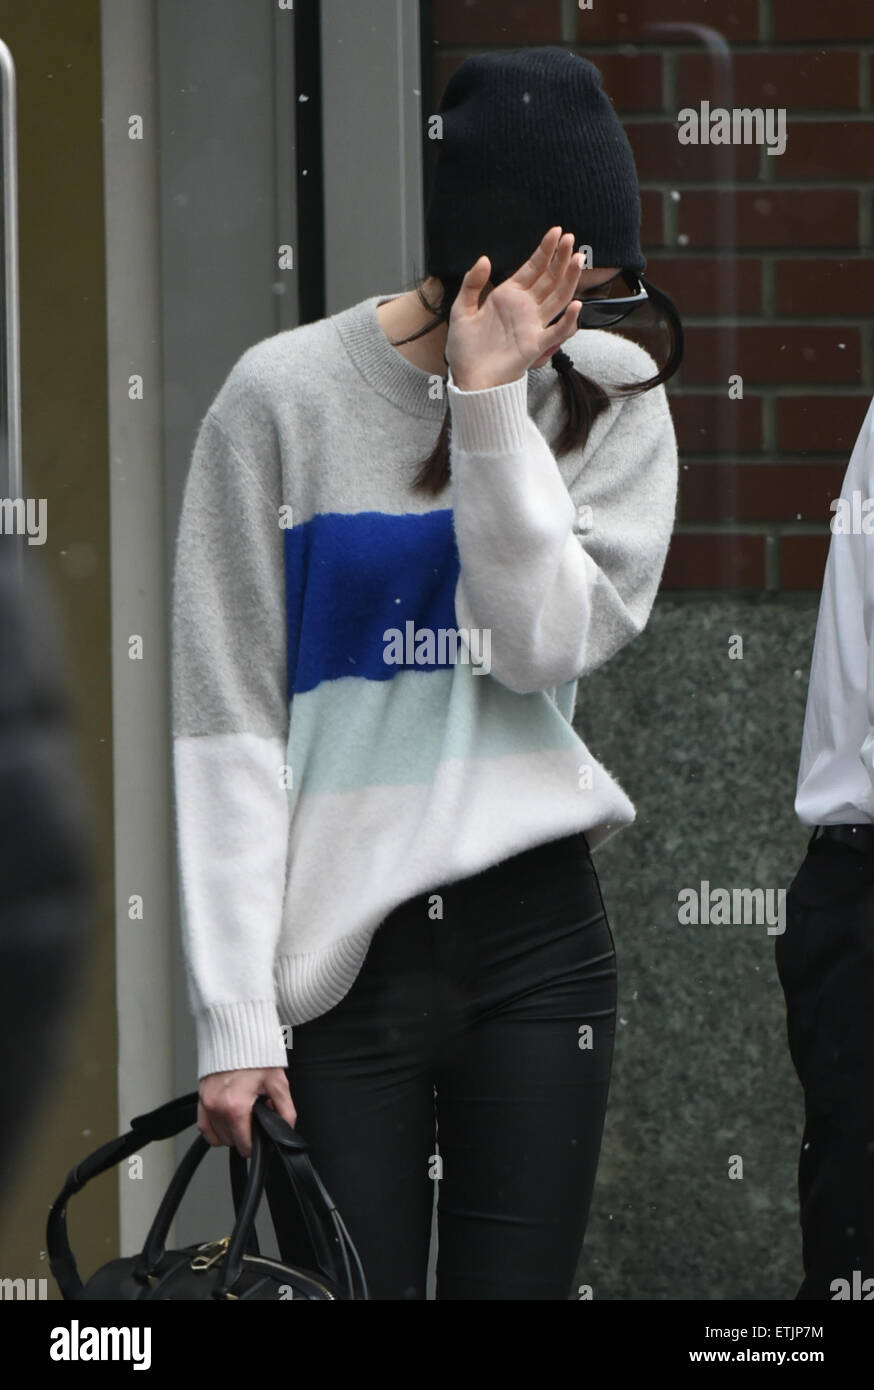 A camera-shy Kendall Jenner braves the snow as she leaves home